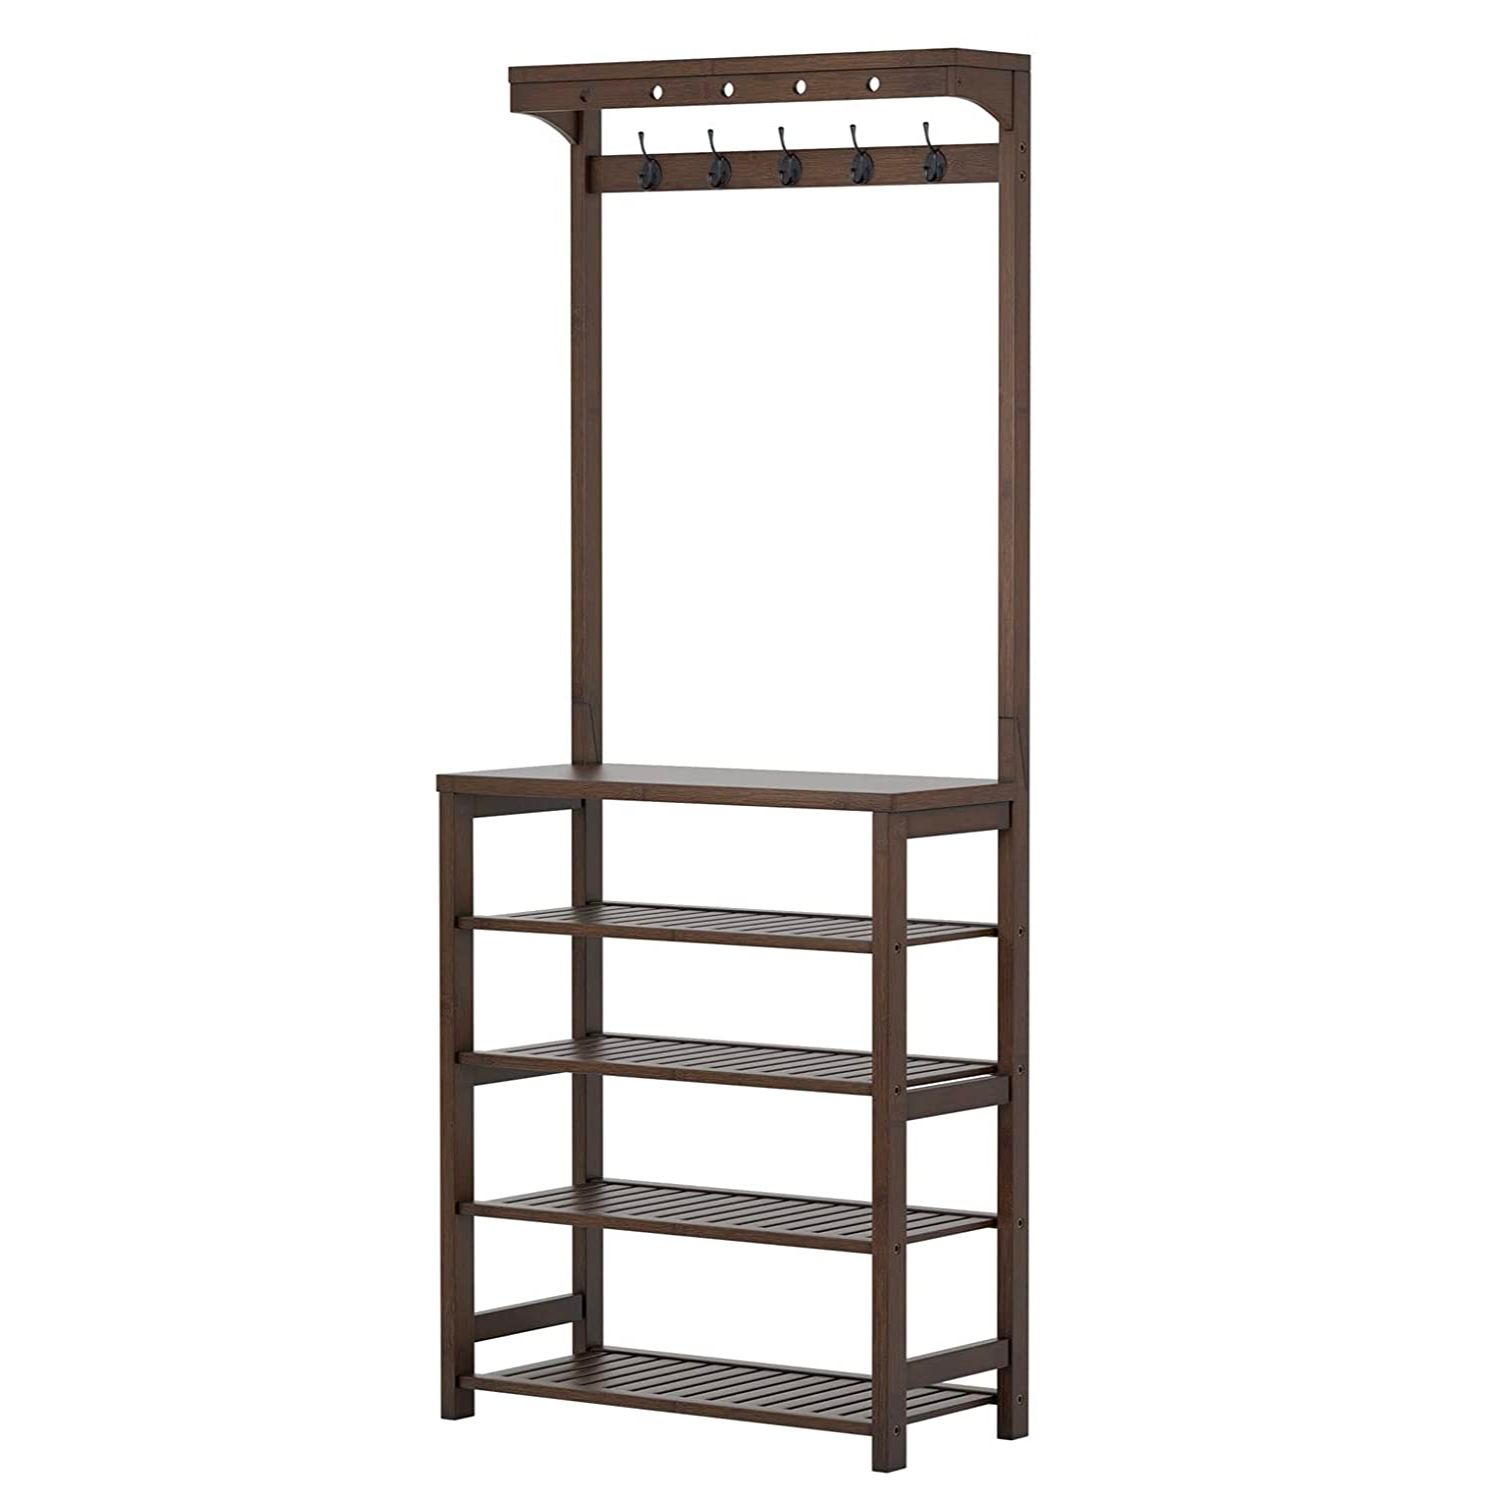 The Best entryway Decor For a Summer Refresh Option: SEIRIONE 5-Tier Coat and Shoe Rack 